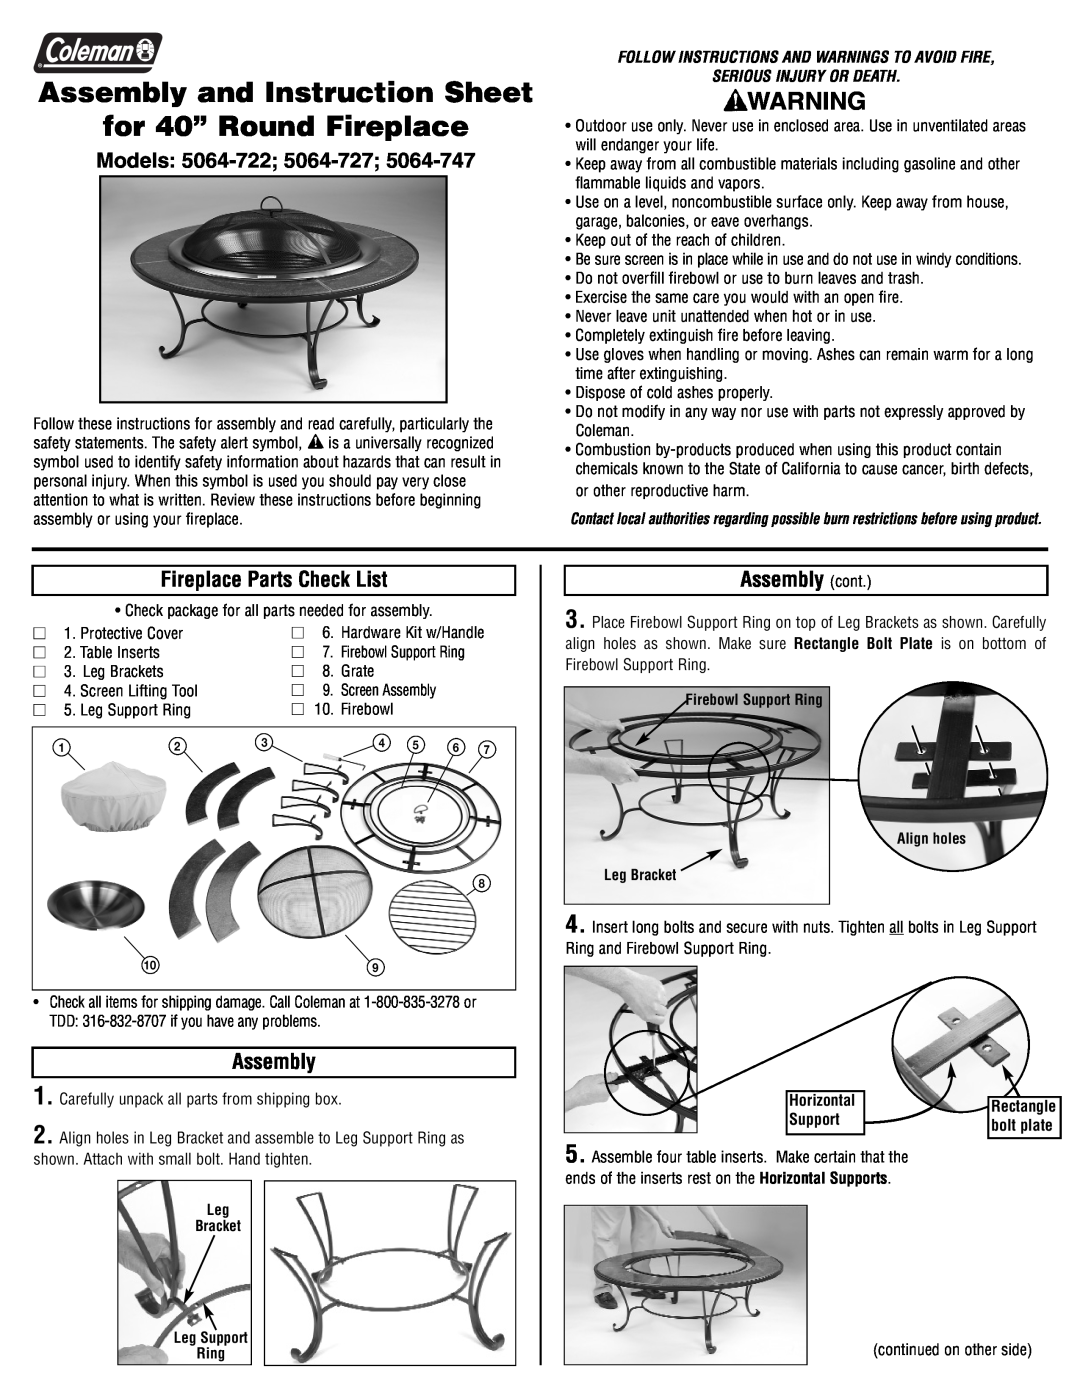 Coleman 5064-722 instruction sheet Models, Fireplace Parts Check List, Assembly cont, Serious Injury Or Death, Support 